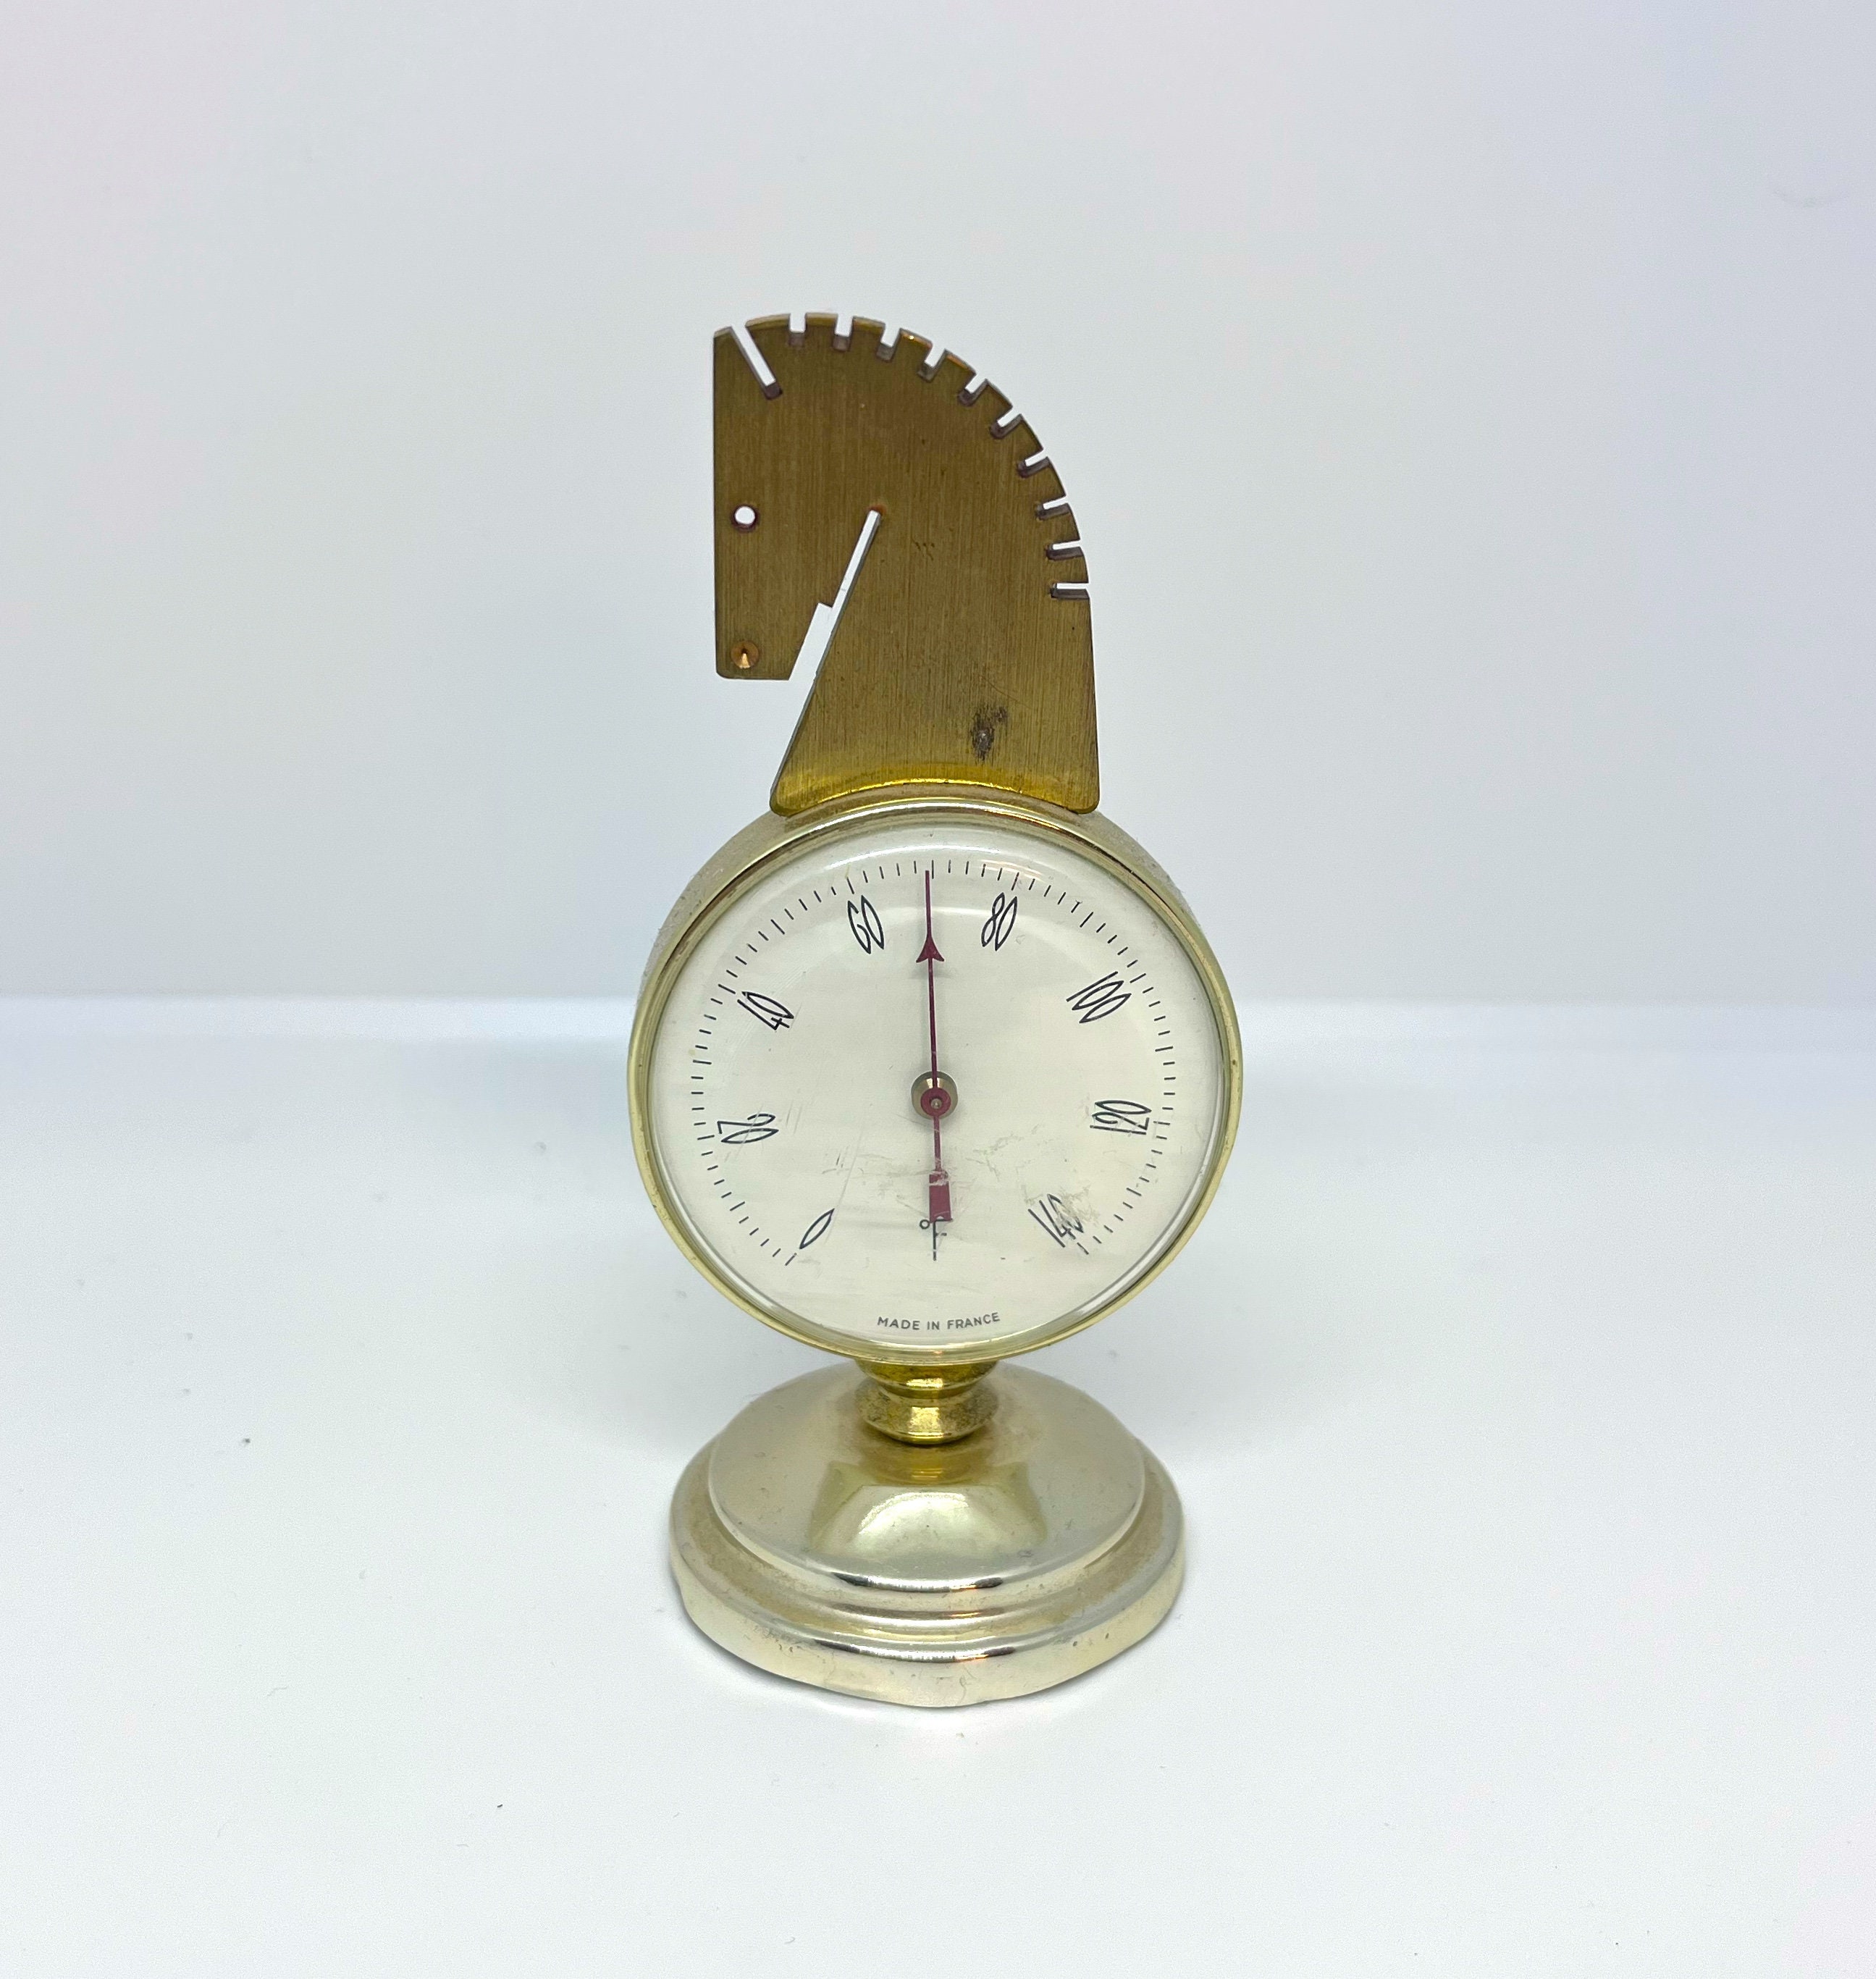 Vintage desk thermometer, Horse head Thermometer, Chess Knight